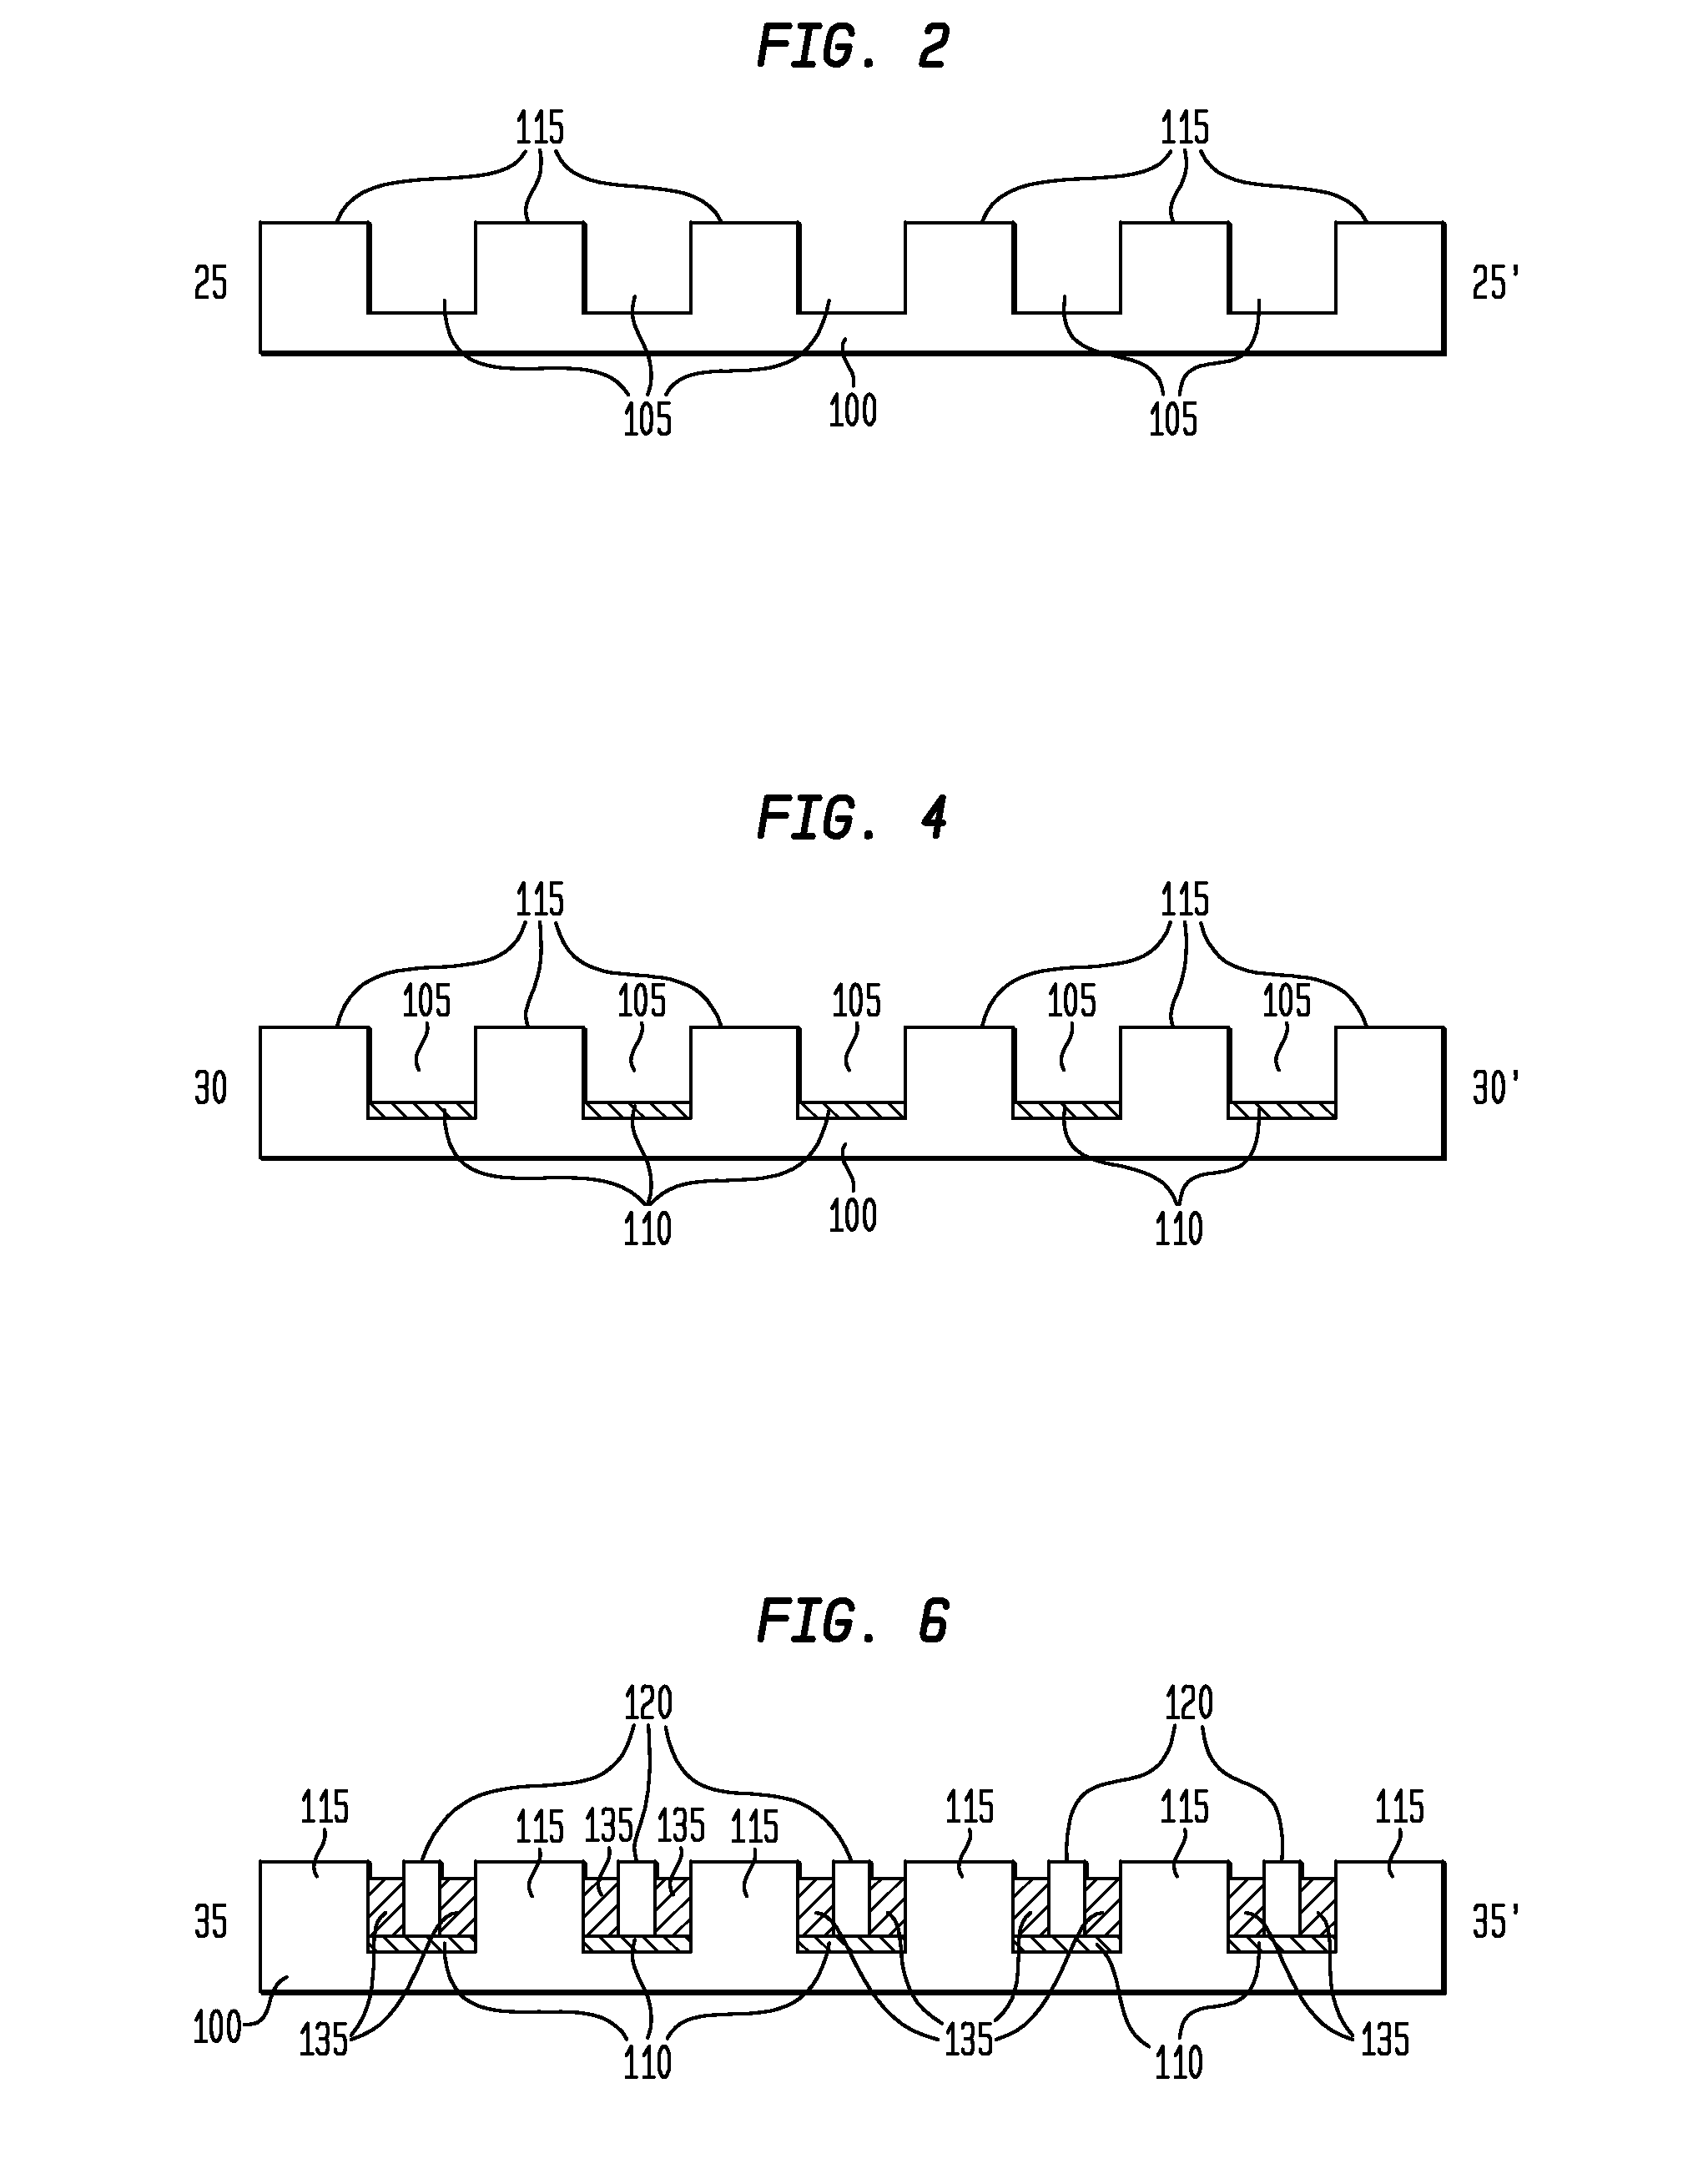 Method of Manufacturing Addressable and Static Electronic Displays